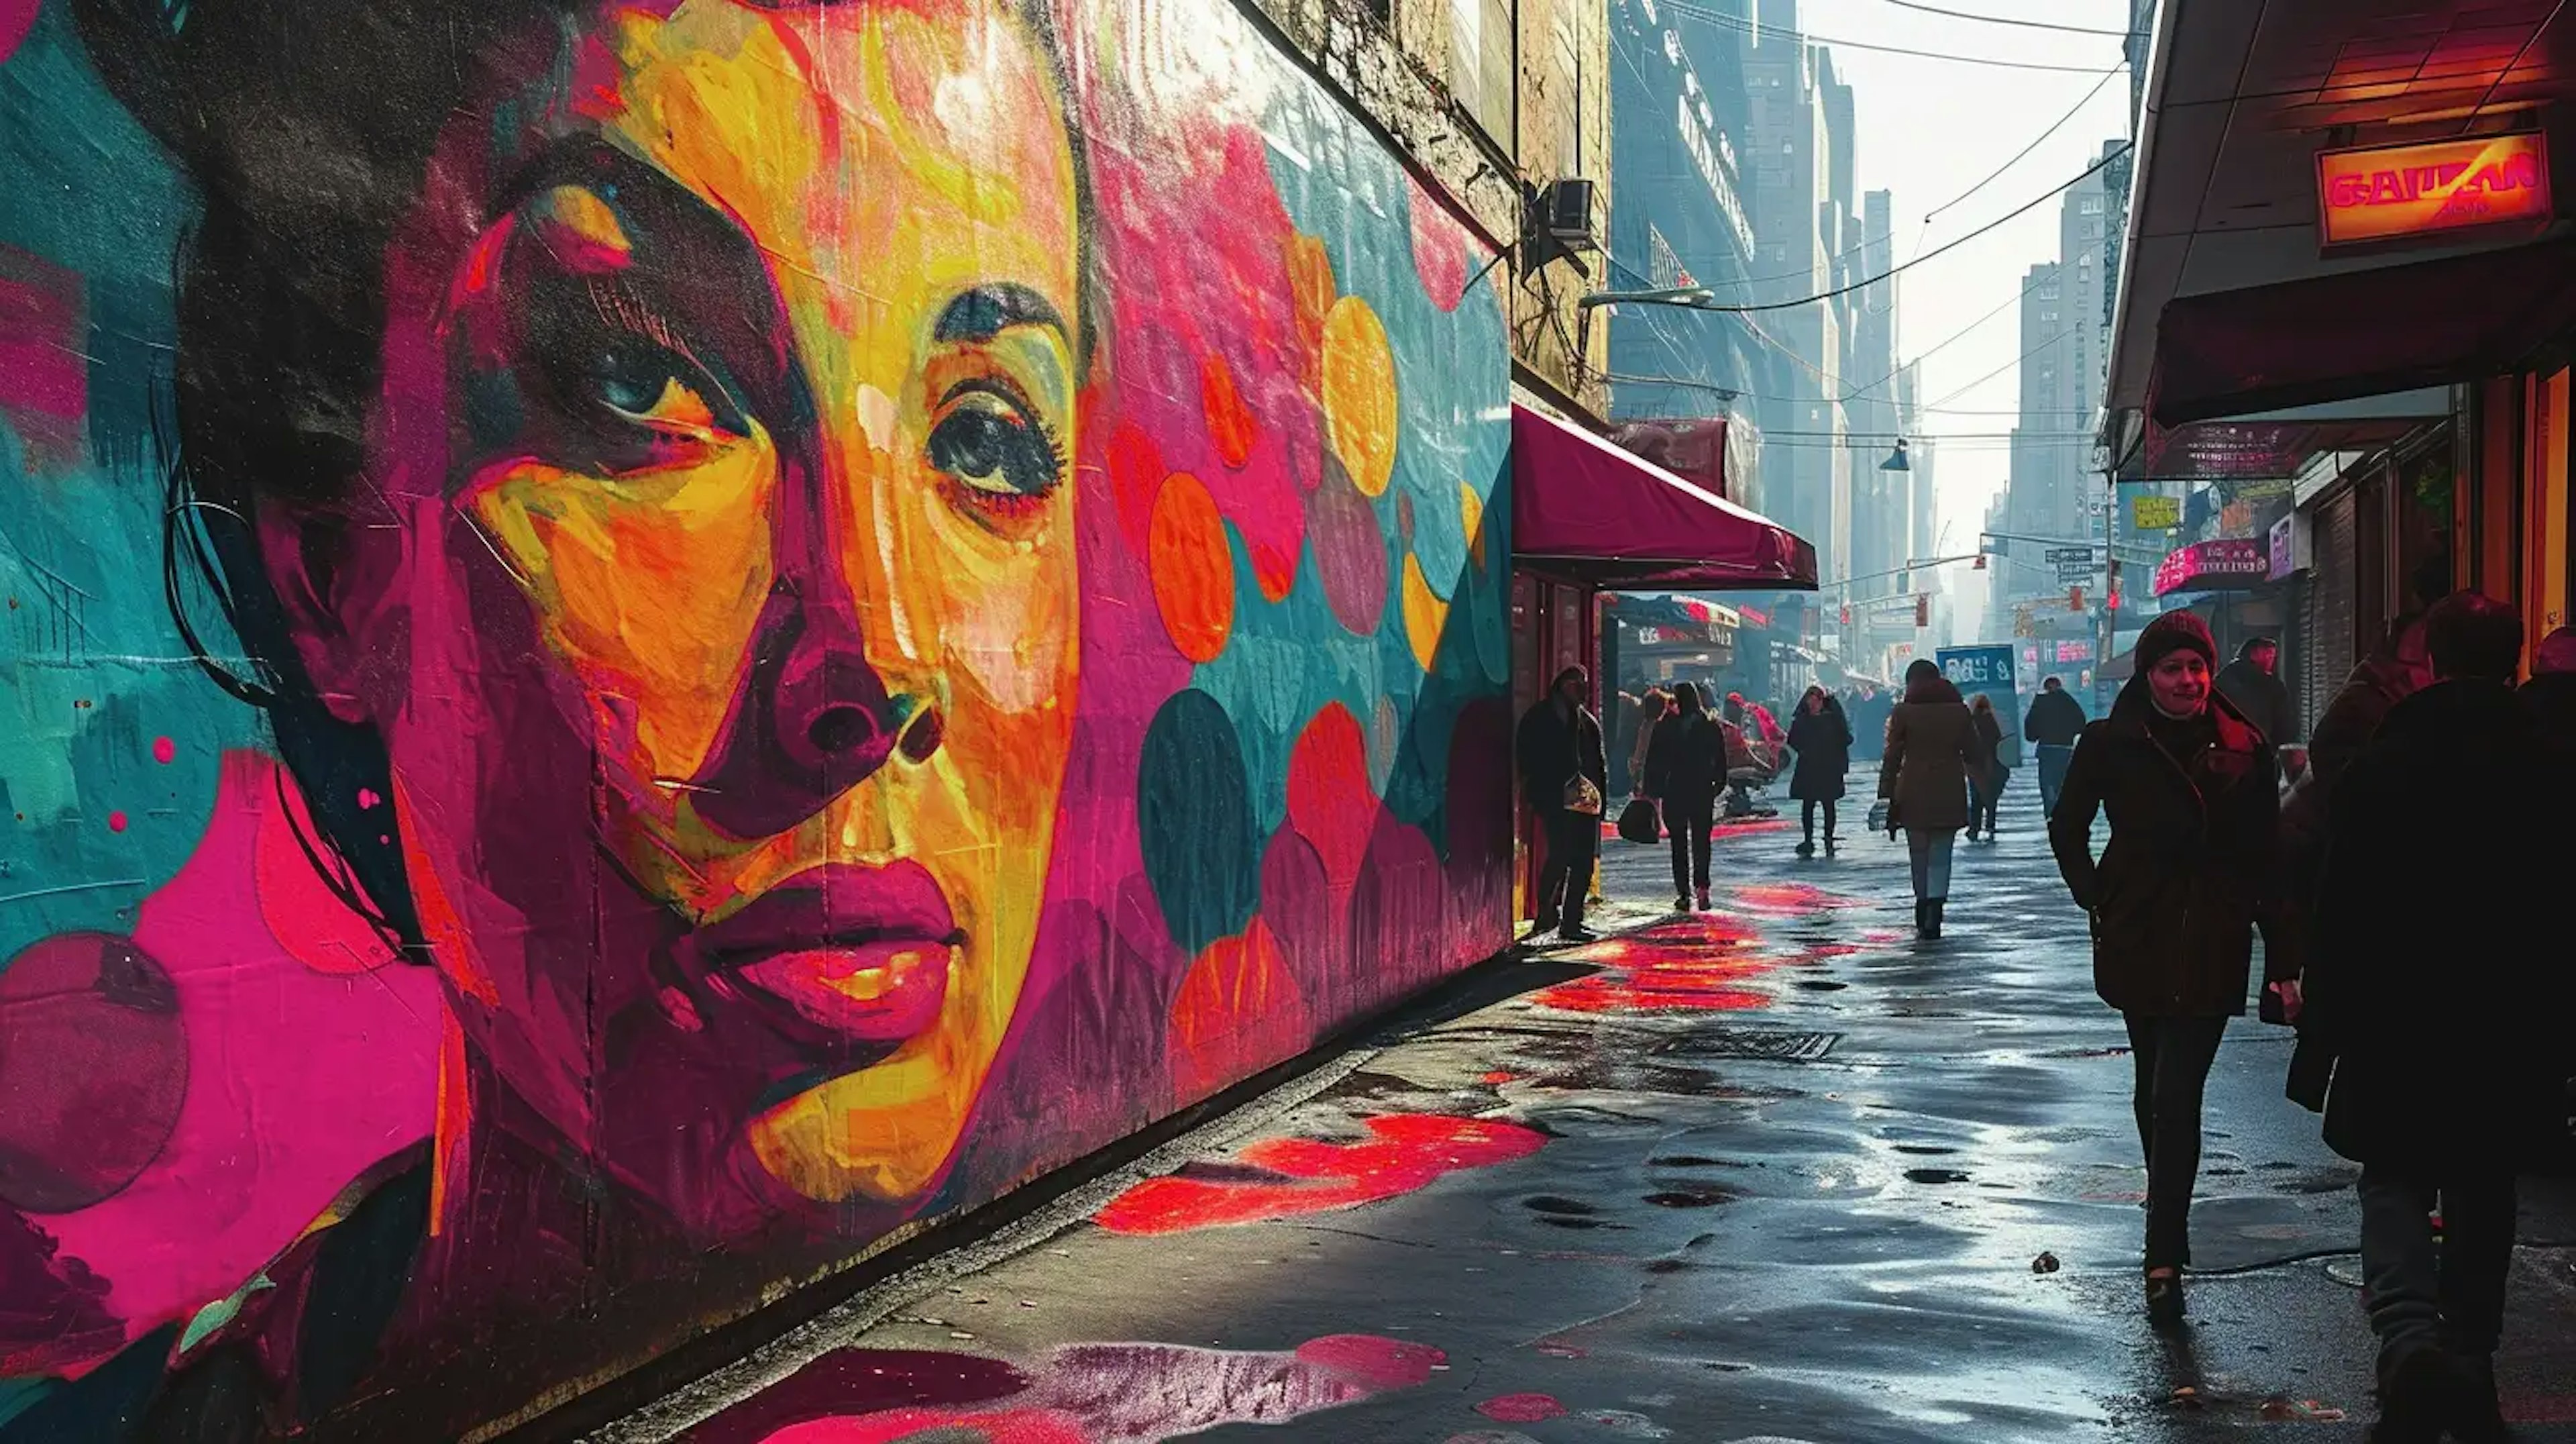 An illustration of a mural of a womans head on a city street